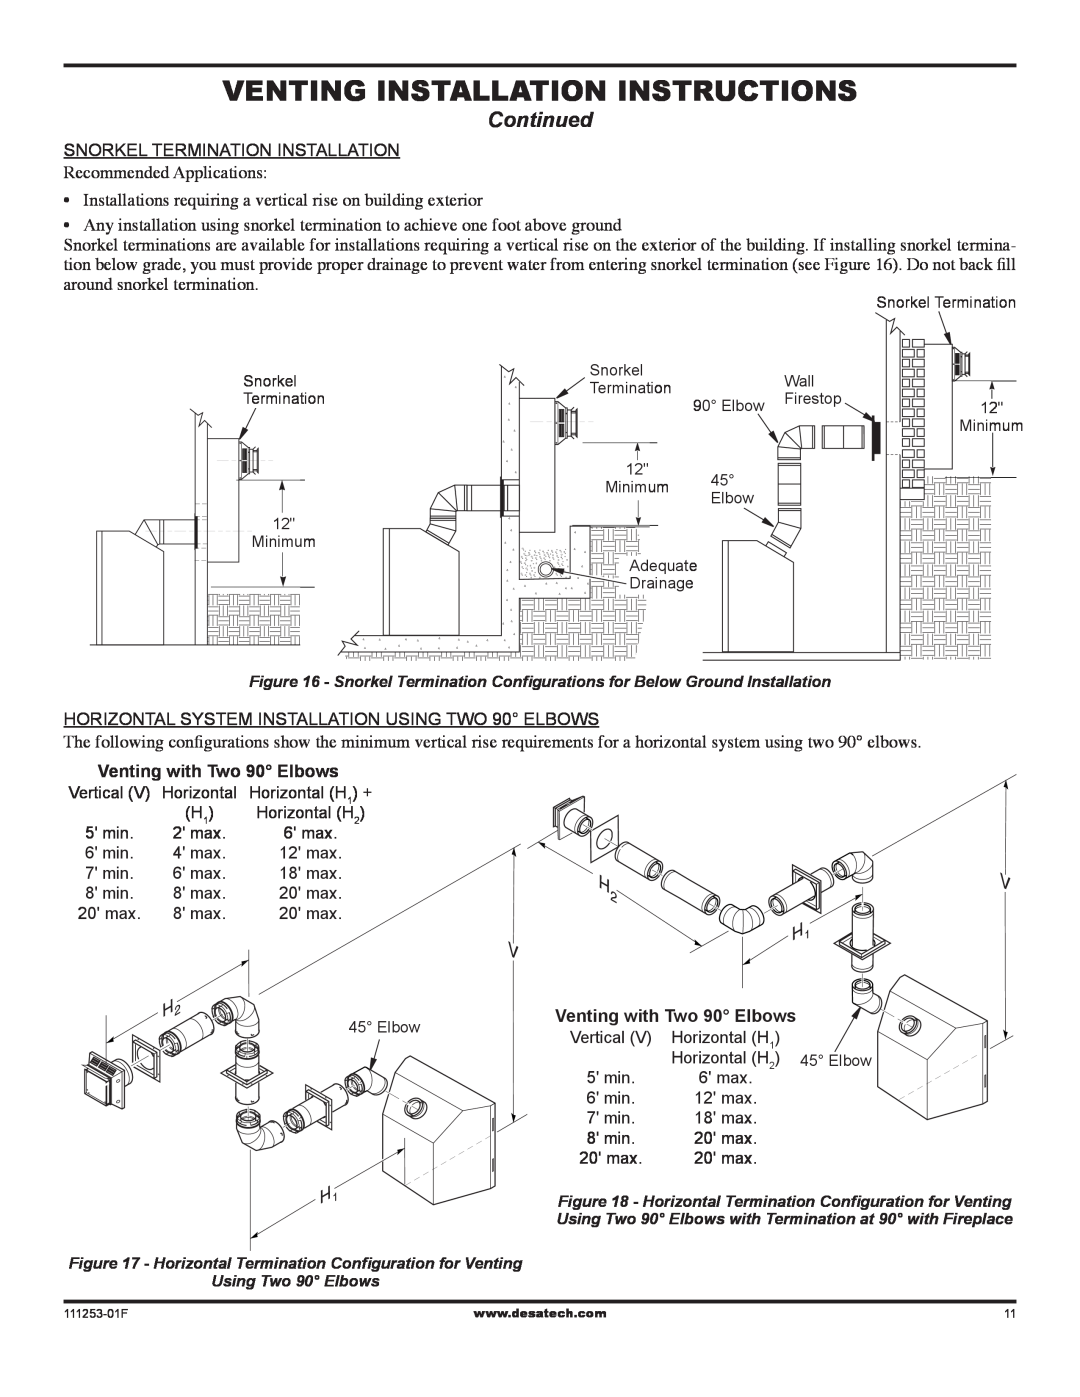 Desa (V)V36EP-B, VV36ENC1 SERIES, VV36EPC1 SERIES Venting Installation instructions, Continued, Venting with Two 90 Elbows 